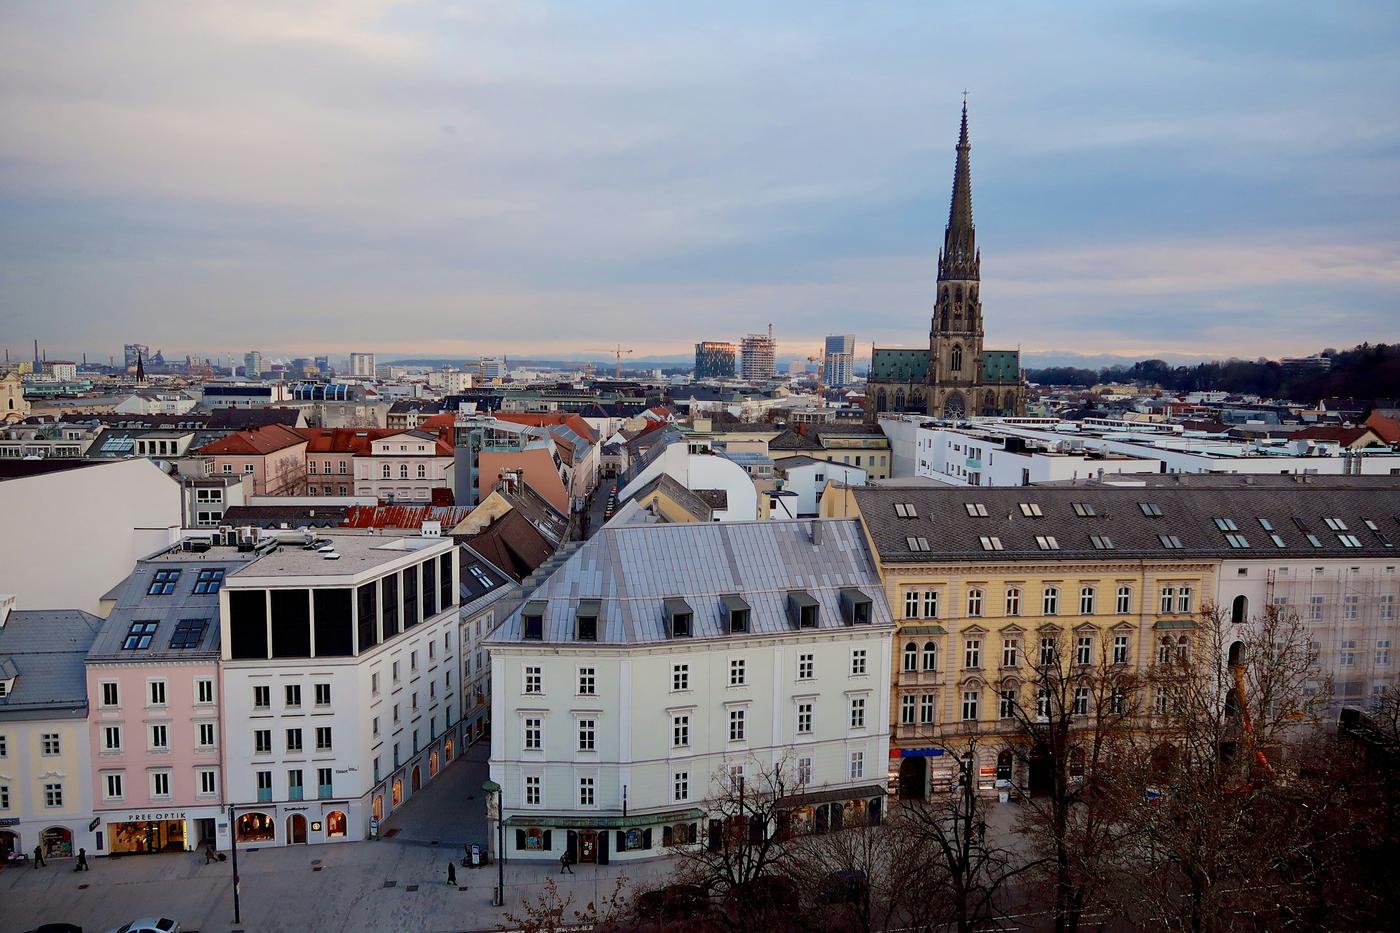 Linz: A cultural jewel on the Danube